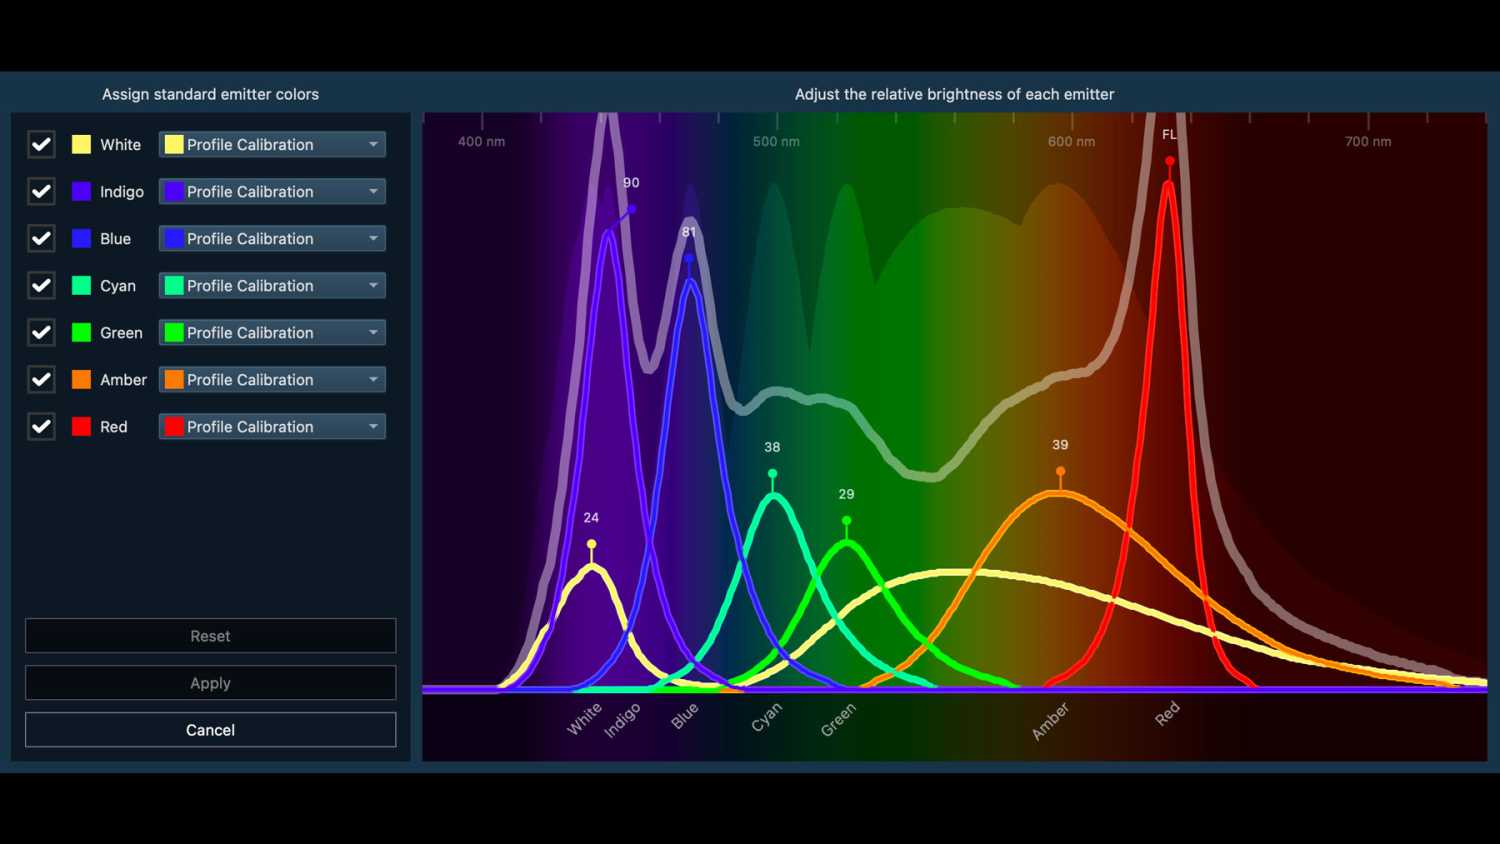 Colour control has received significant upgrades in the new software